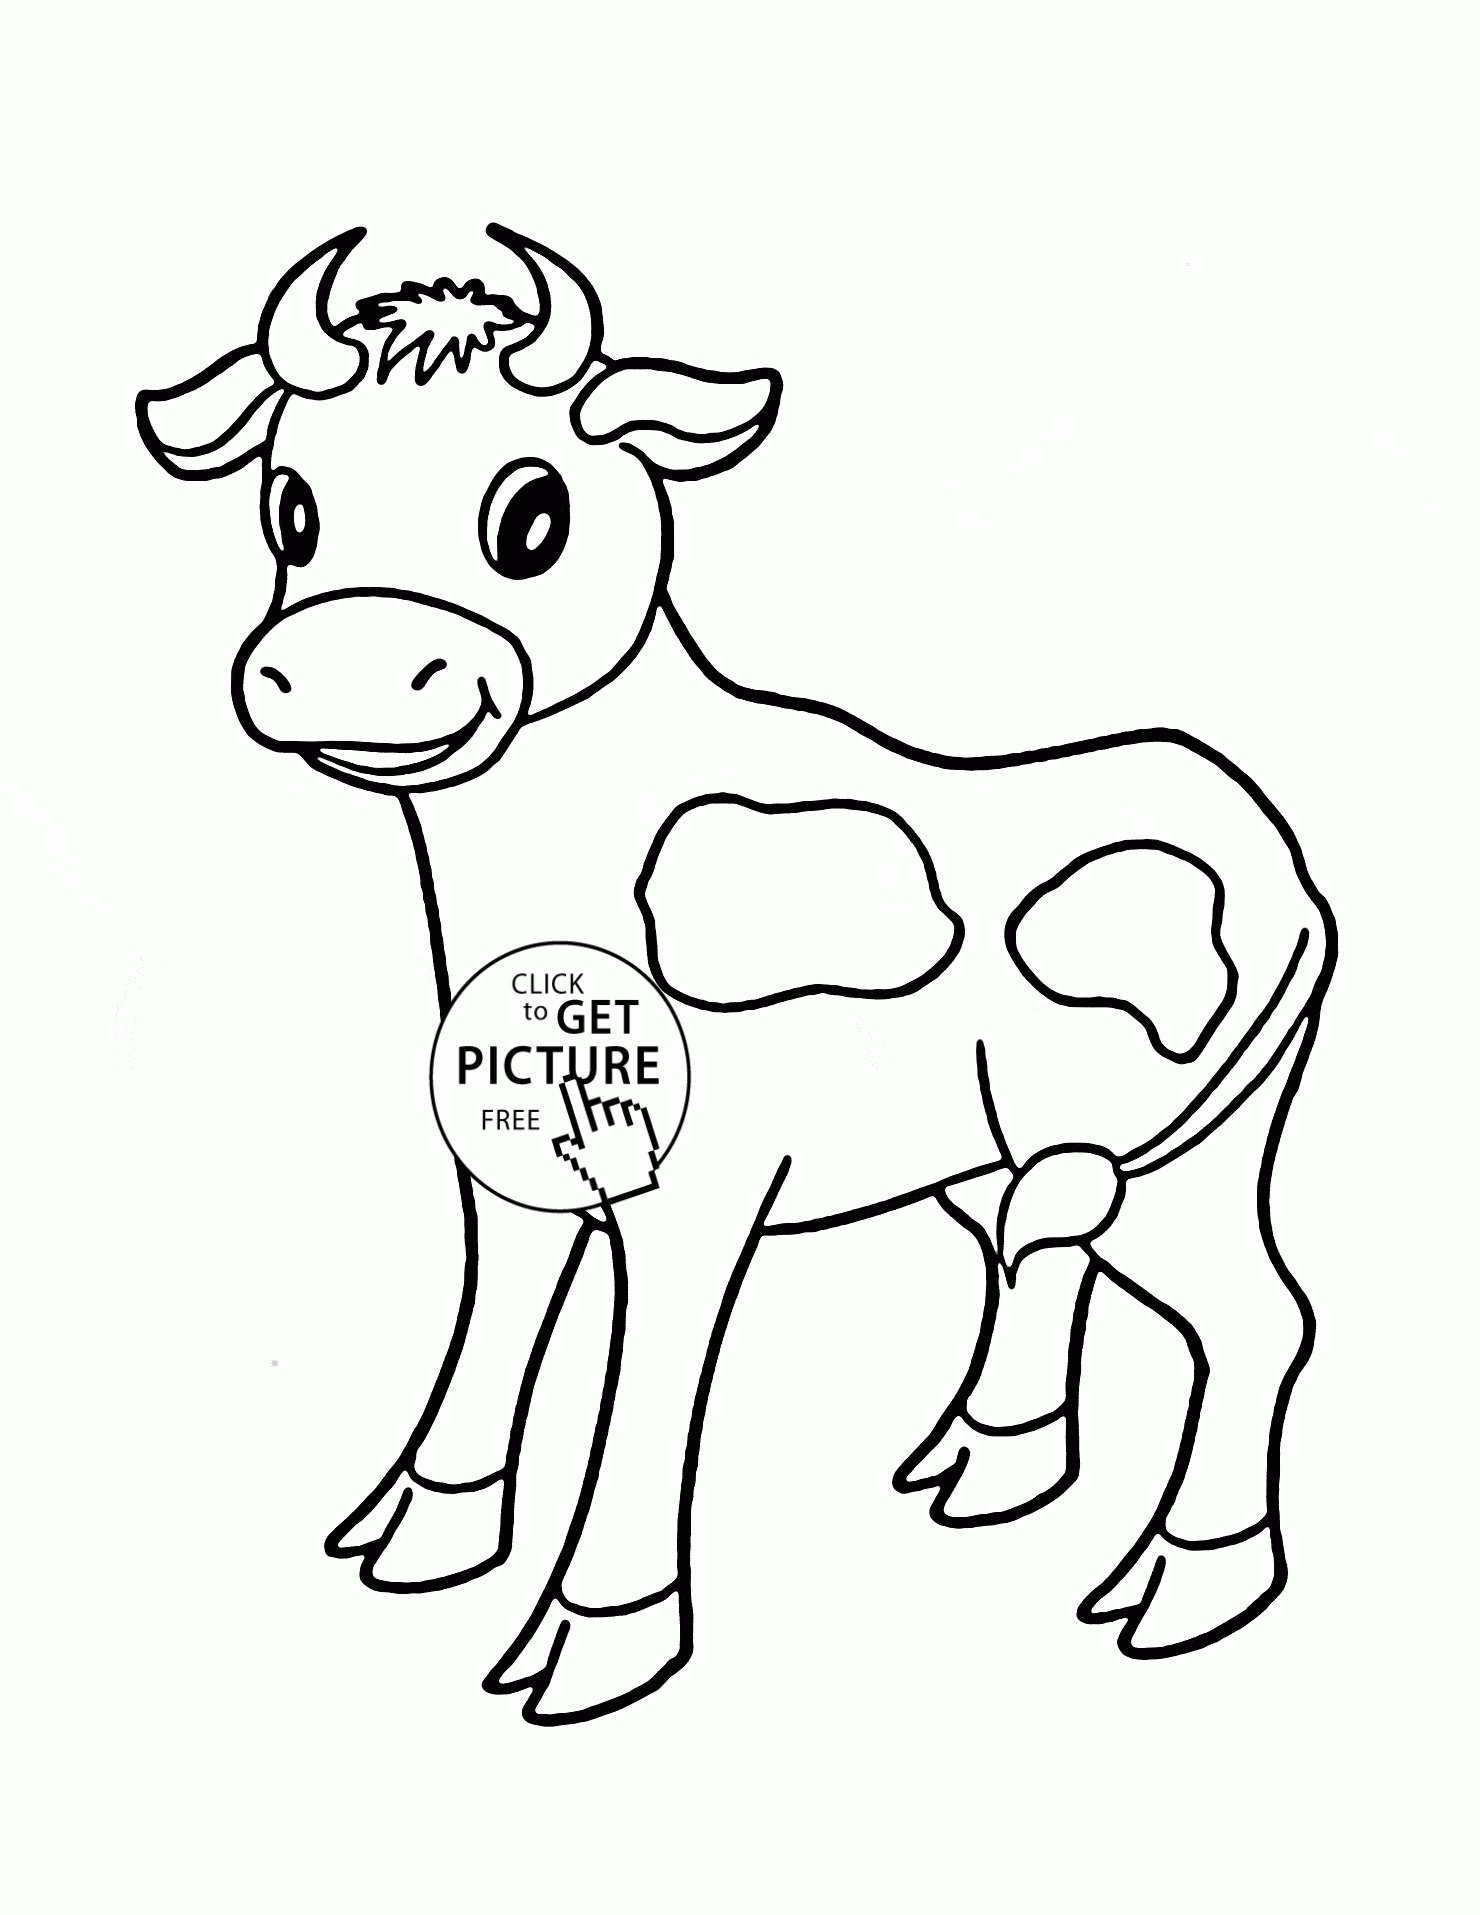 Little Cow Coloring Page For Kids, Animal Coloring Pages - Coloring Pages Of Cows Free Printable